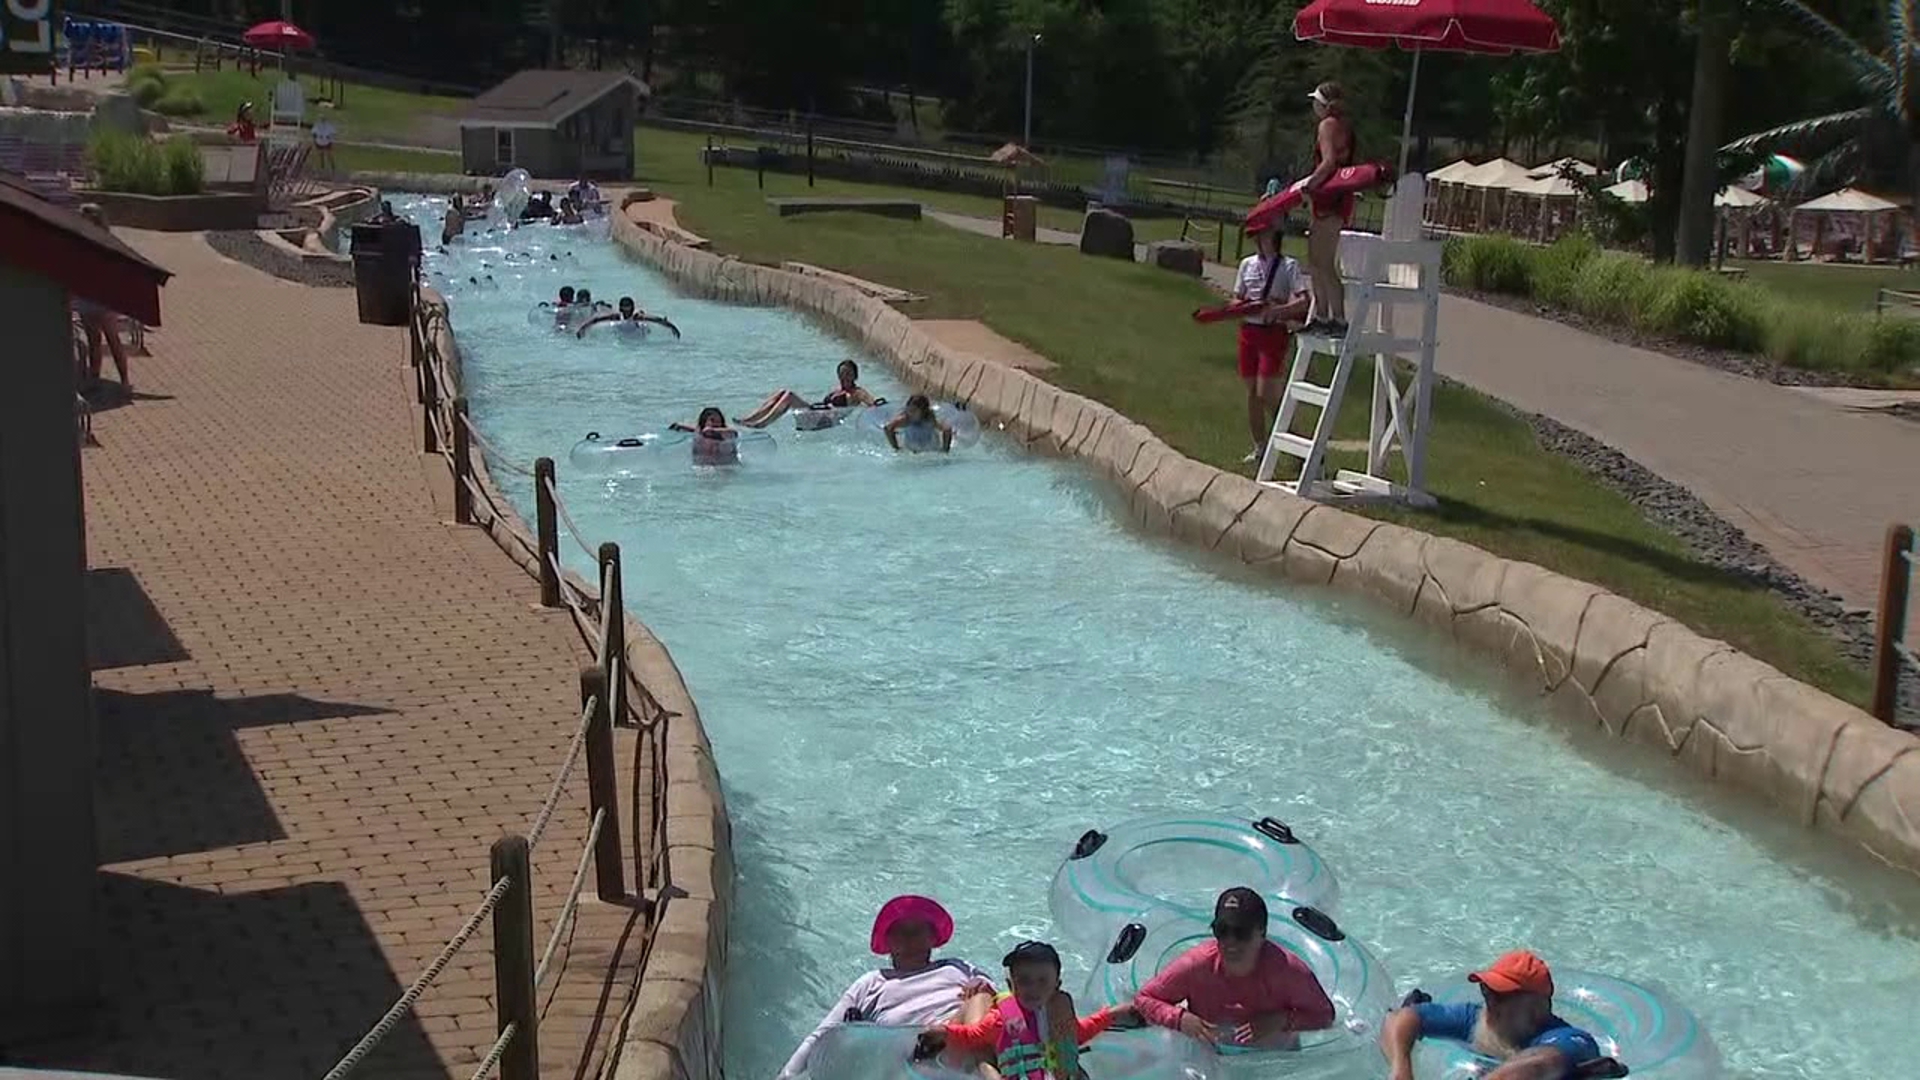 As the temperatures rise, people are looking for ways to stay cool. For those in the Poconos, that means a trip to the waterpark.